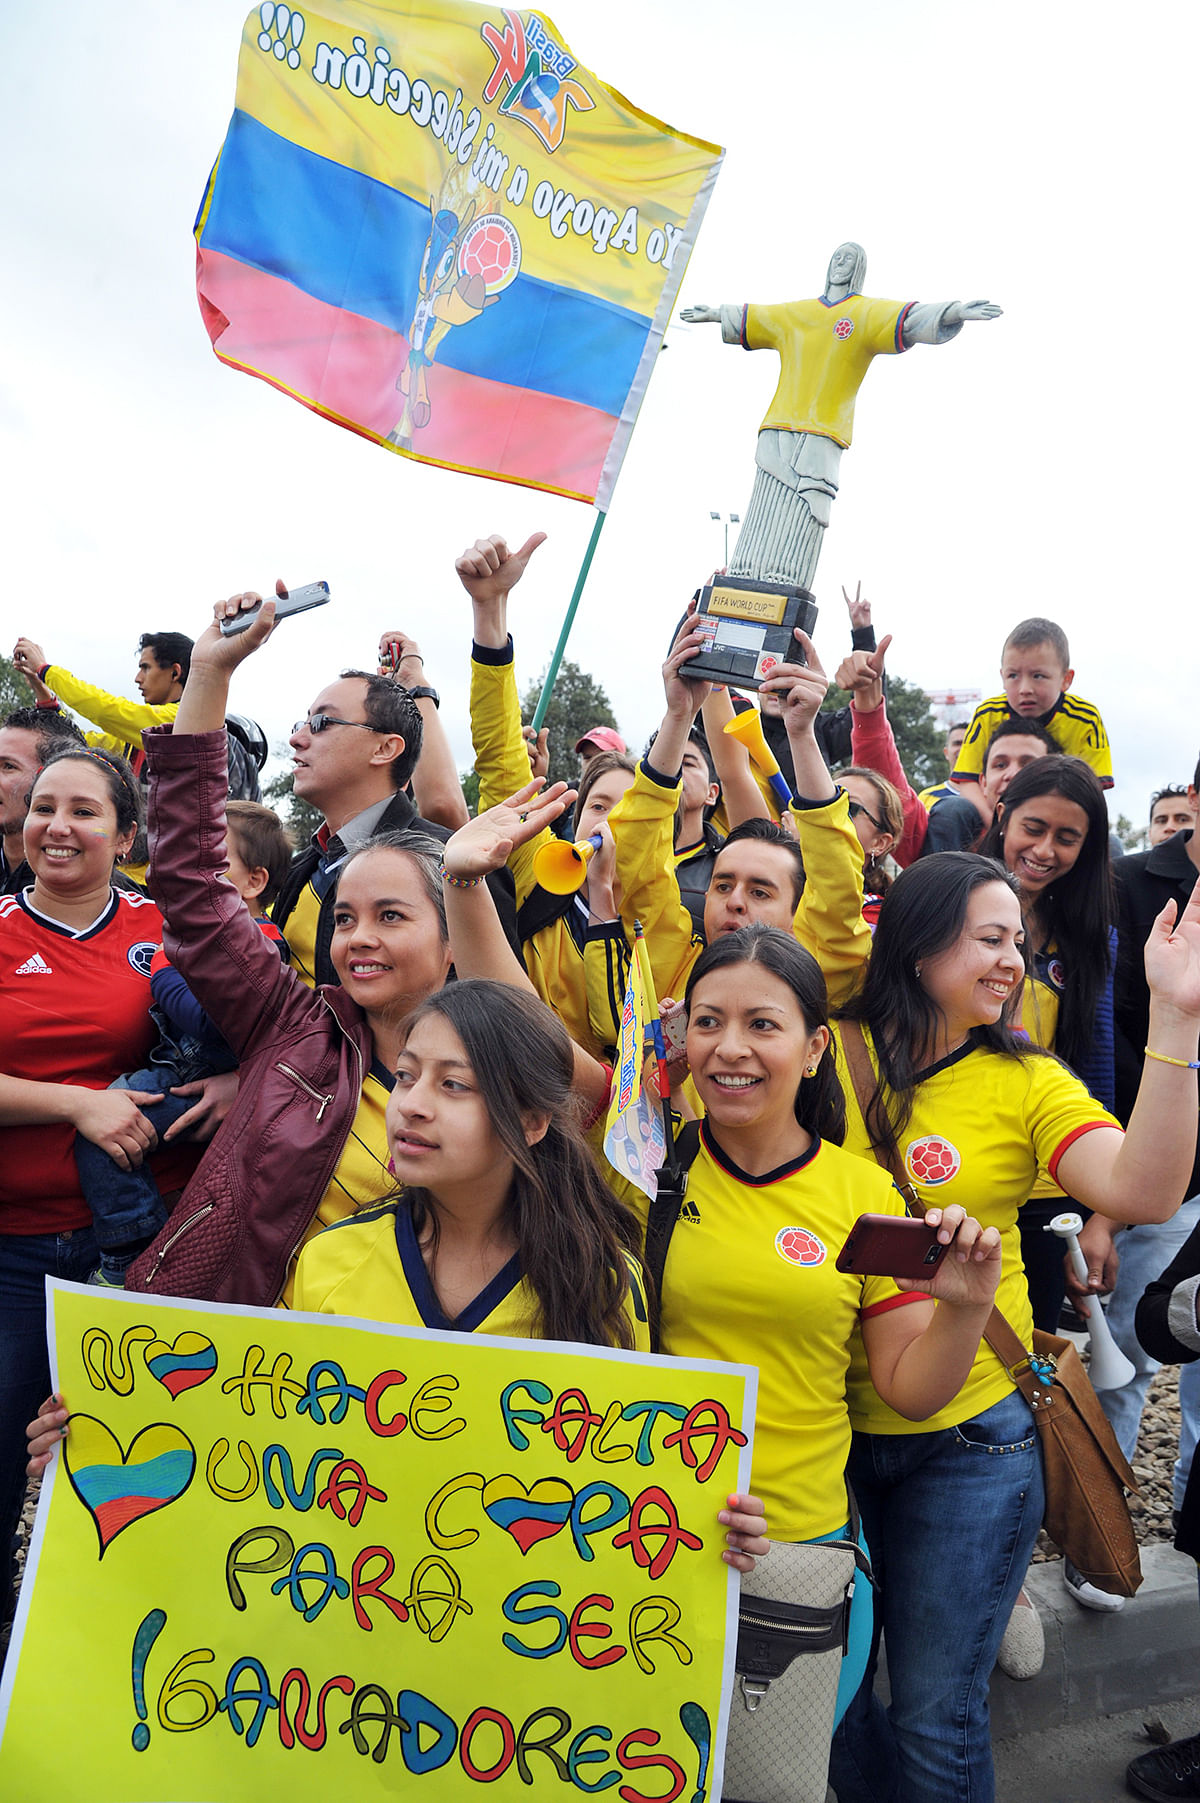 A crowd of Colombian fans greet their national football team upon their arrival in Bogota after the FIFA World Cup Brazil 2014, on July 6, 2014. Photo: Getty Images